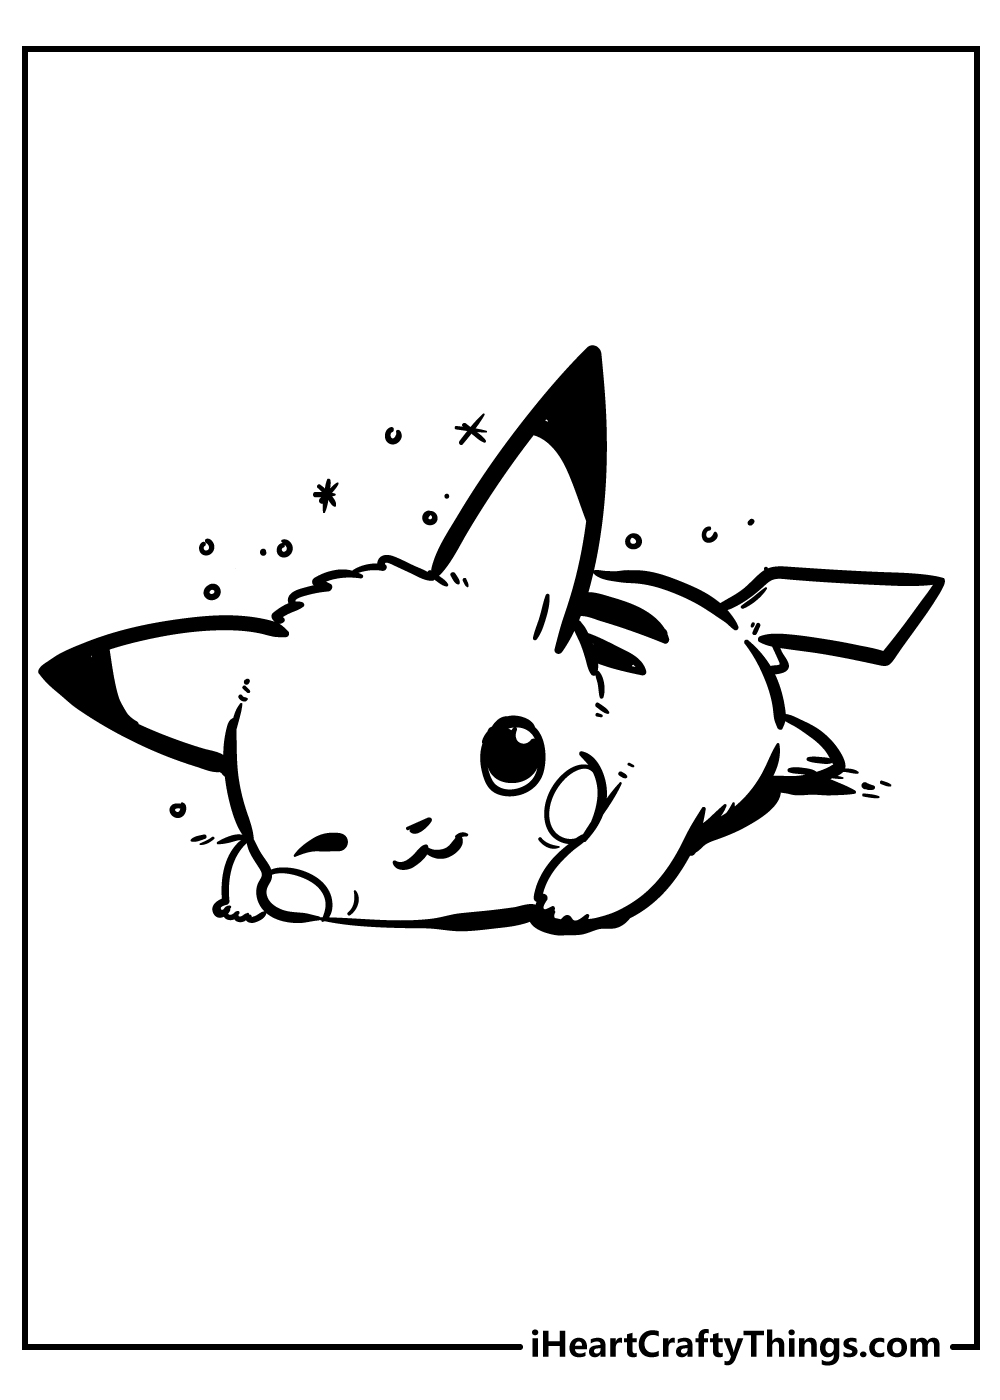 Pikachu coloring pages free pdf download